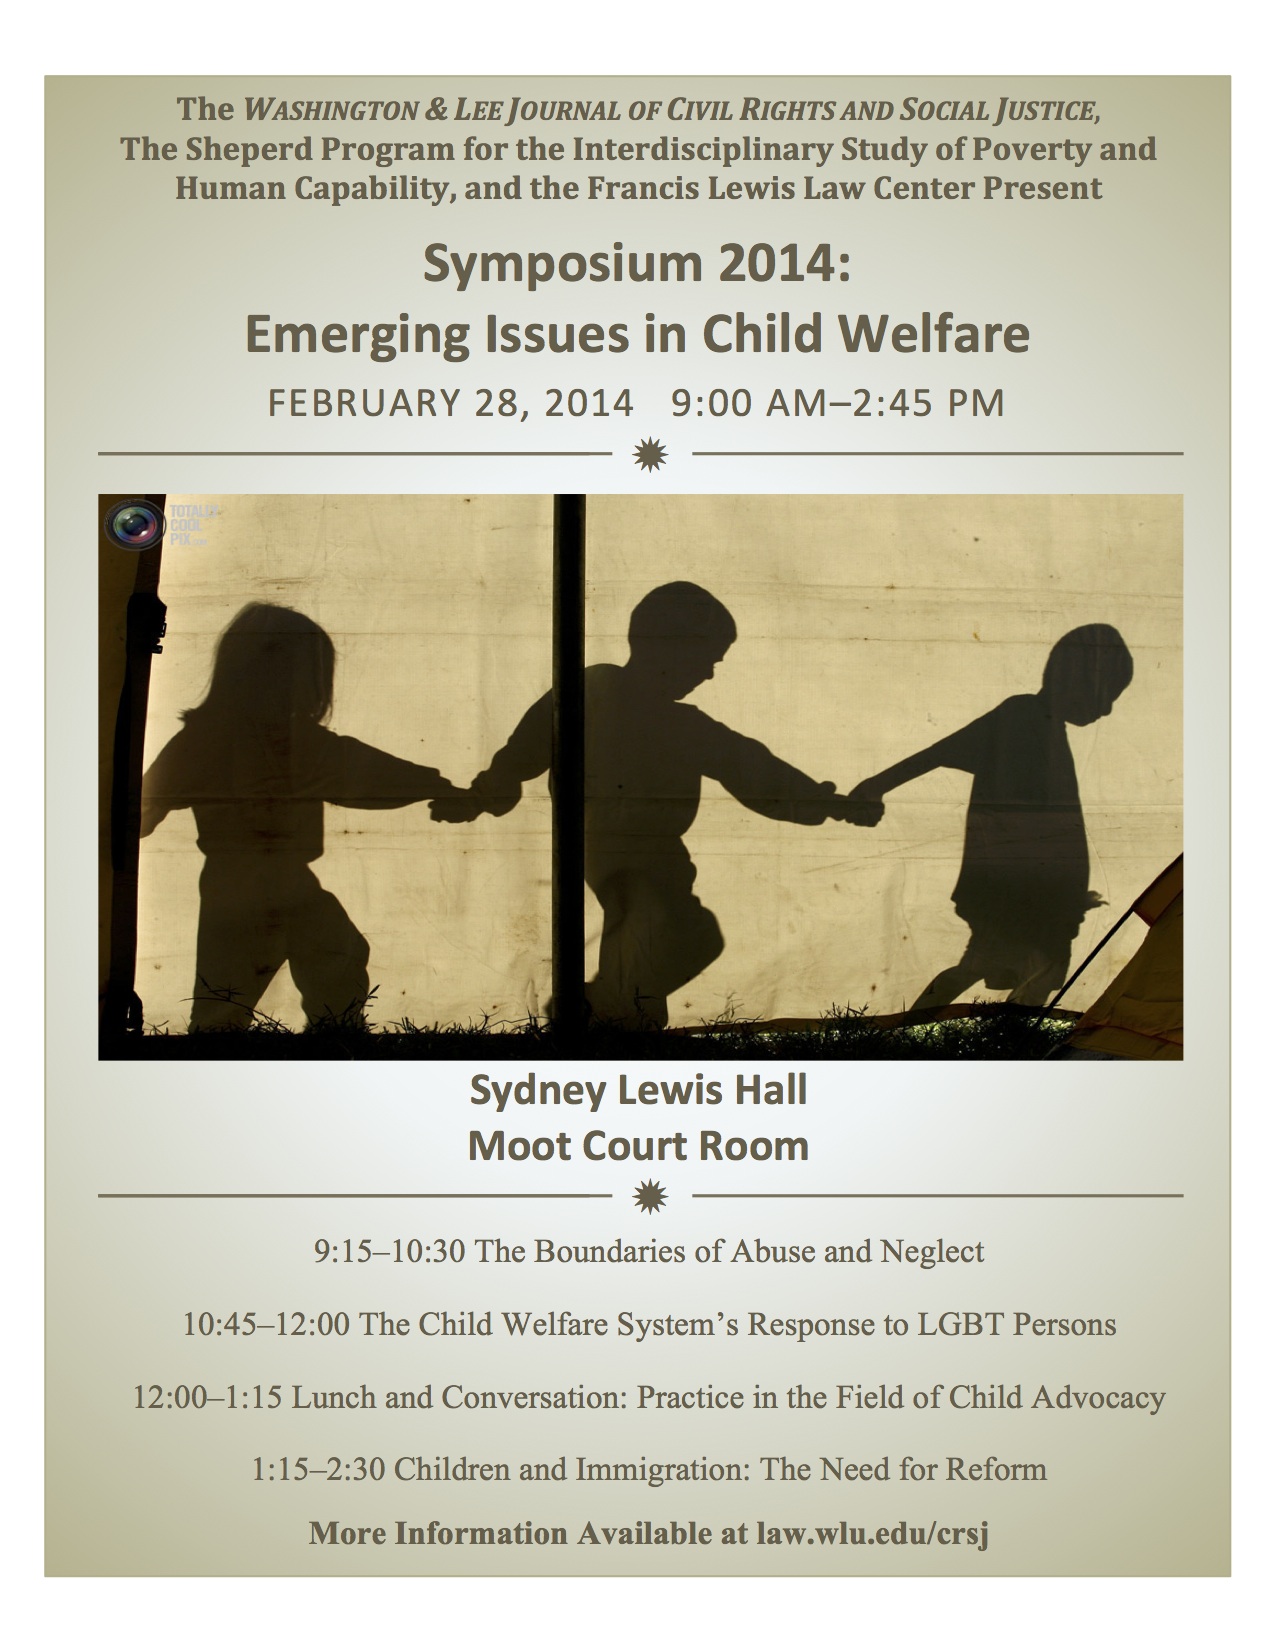 2014: Emerging Issues in Child Welfare